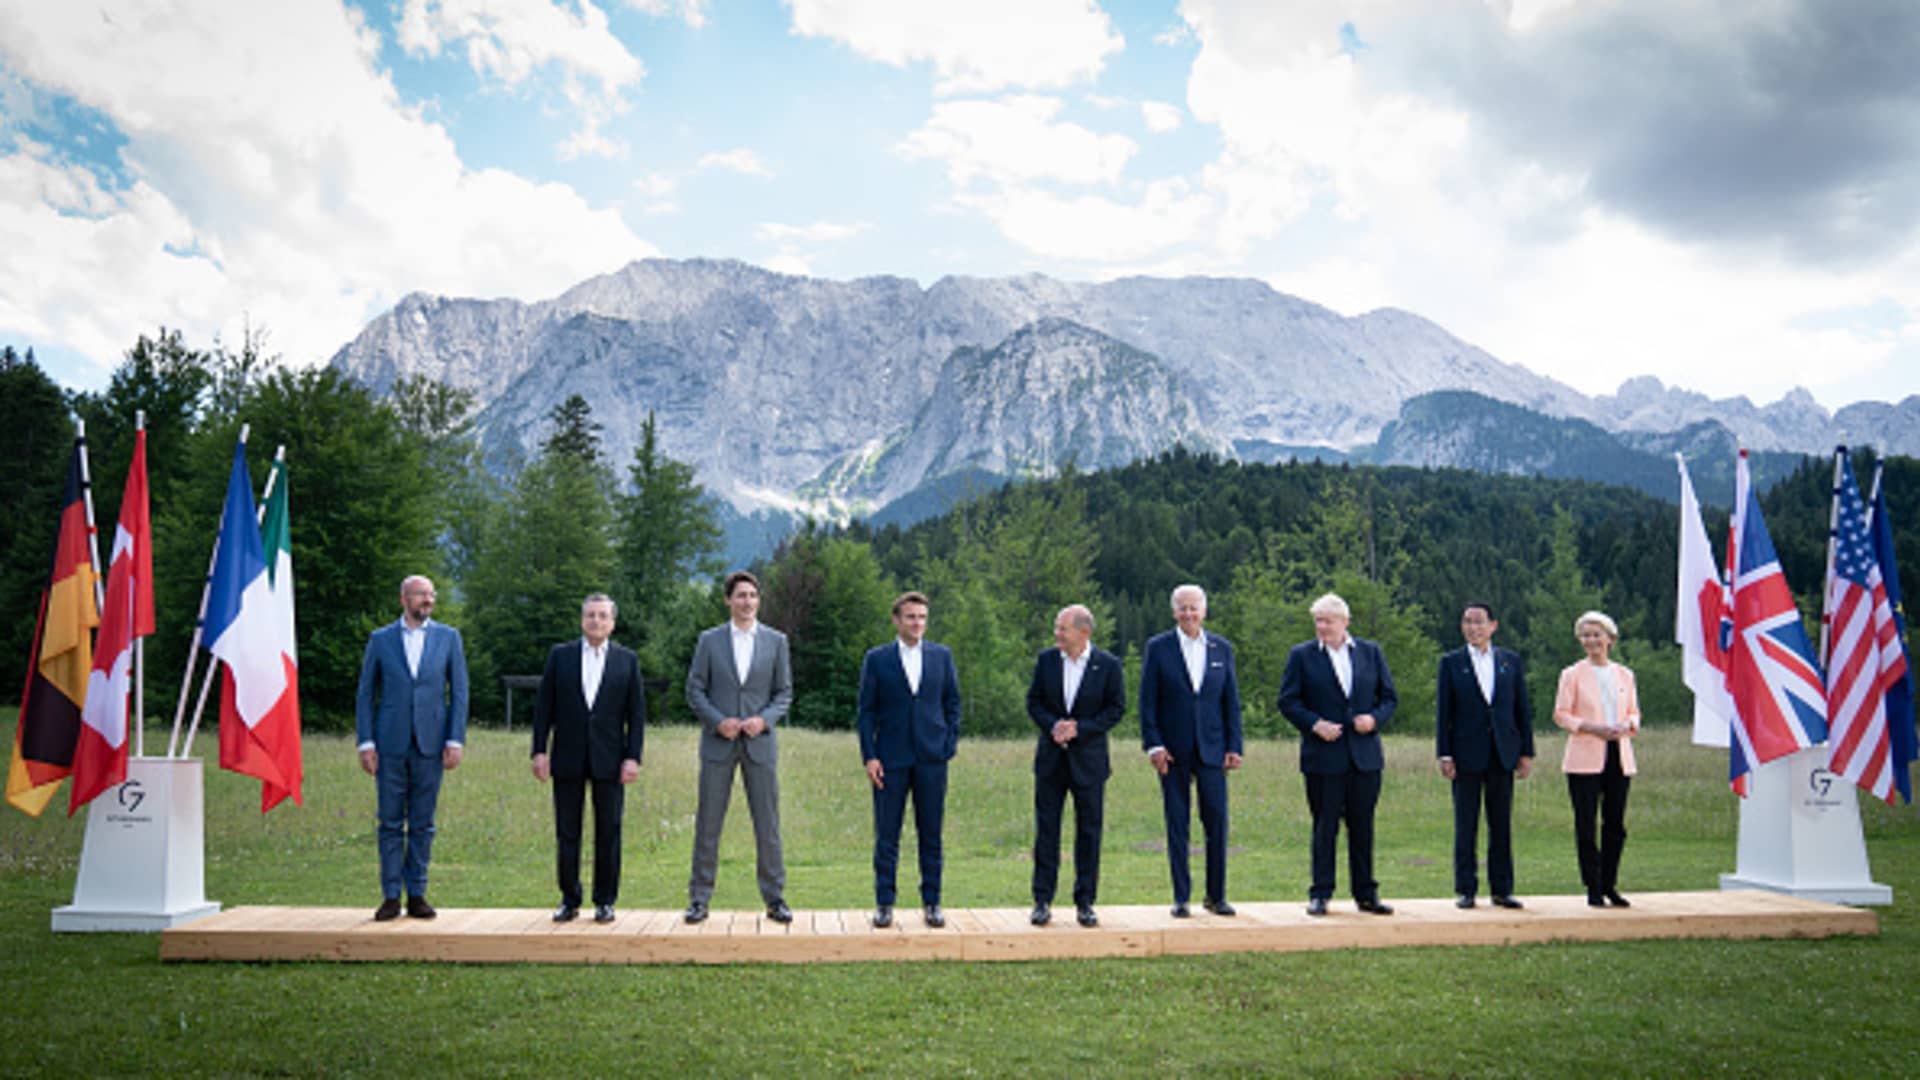 G-7 leaders to set up a 'Climate Club' and take immediate action to secure energy supply